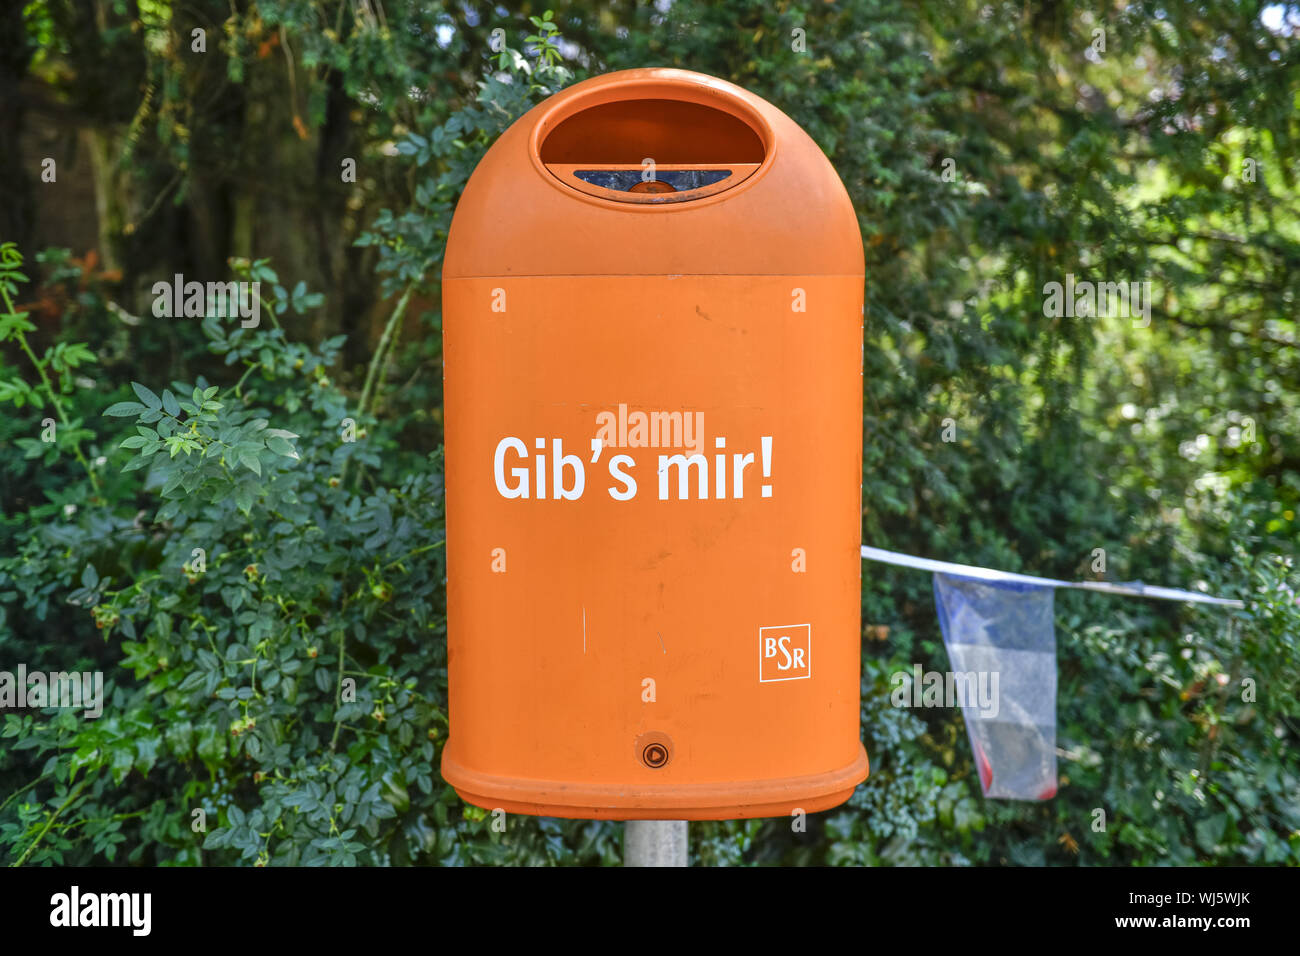 Rubbish, waste disposal, Turning on, Berlin, Berlin town cleaning, BSR, Germany, peculiarly, bucket, is there to me, funnily, strangely, laxly, funnil Stock Photo